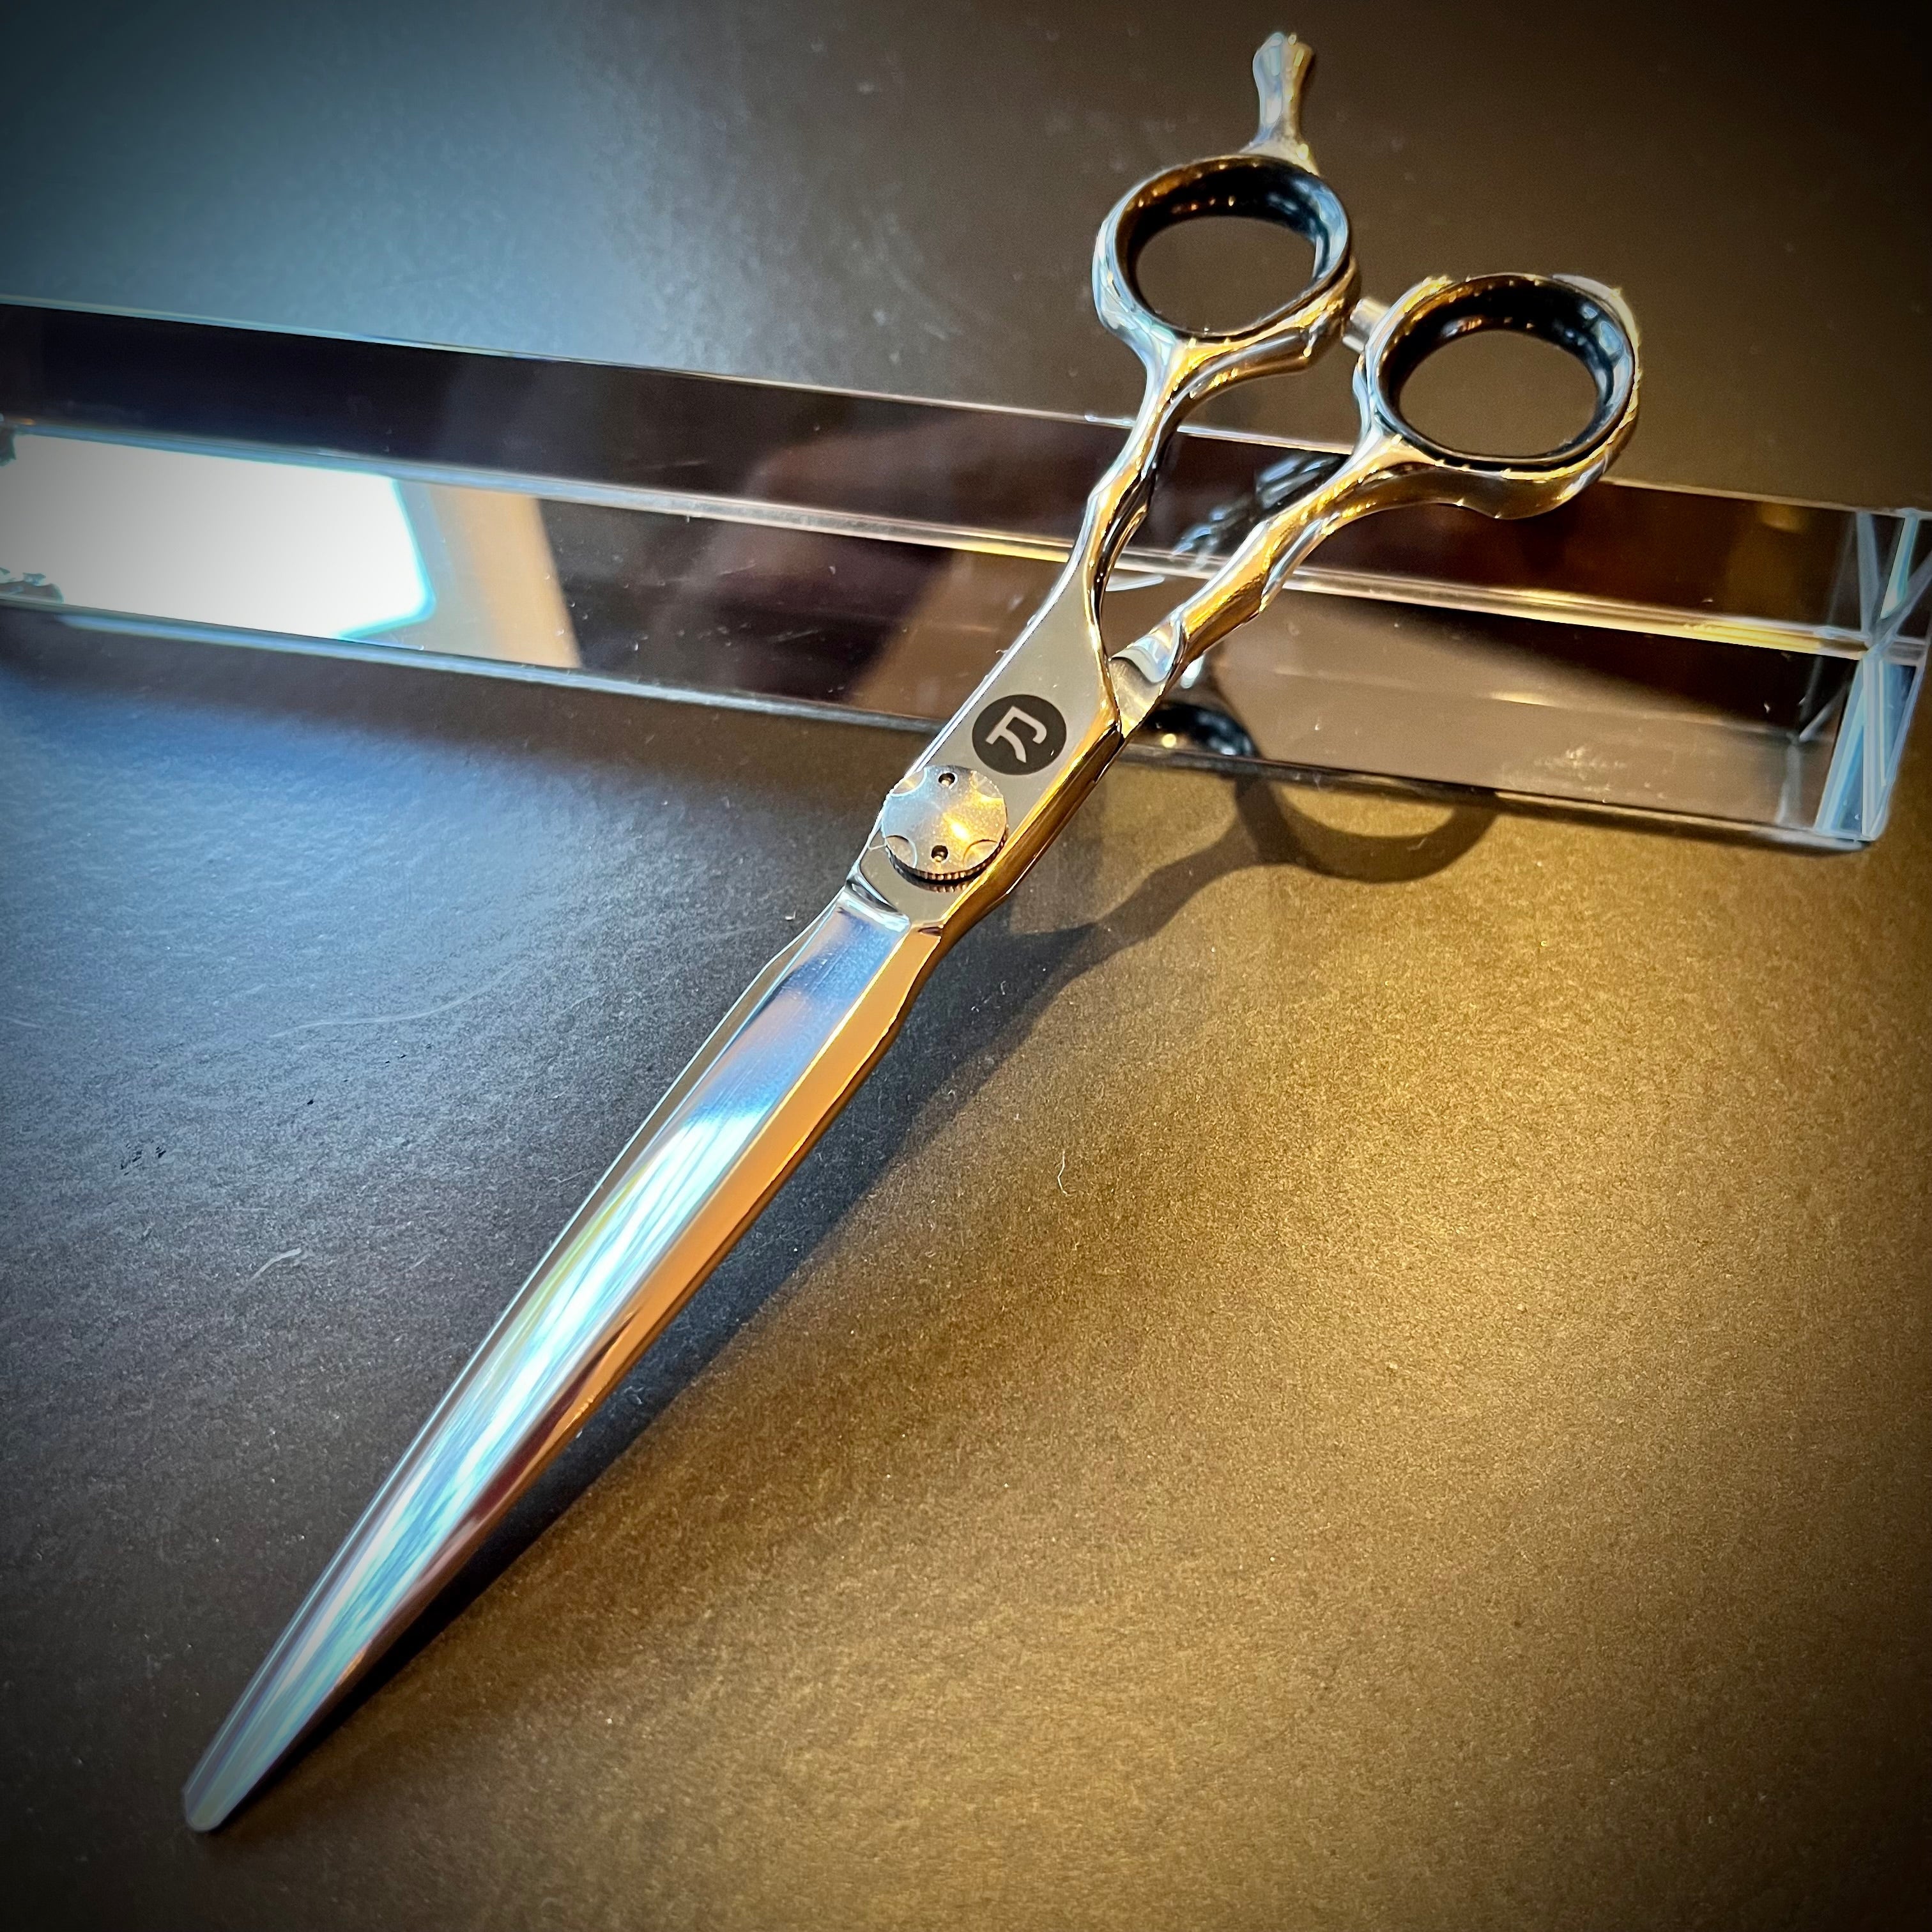 Hair Shears Have Different Blade Edges Including Convex, Sword, Bevel and More